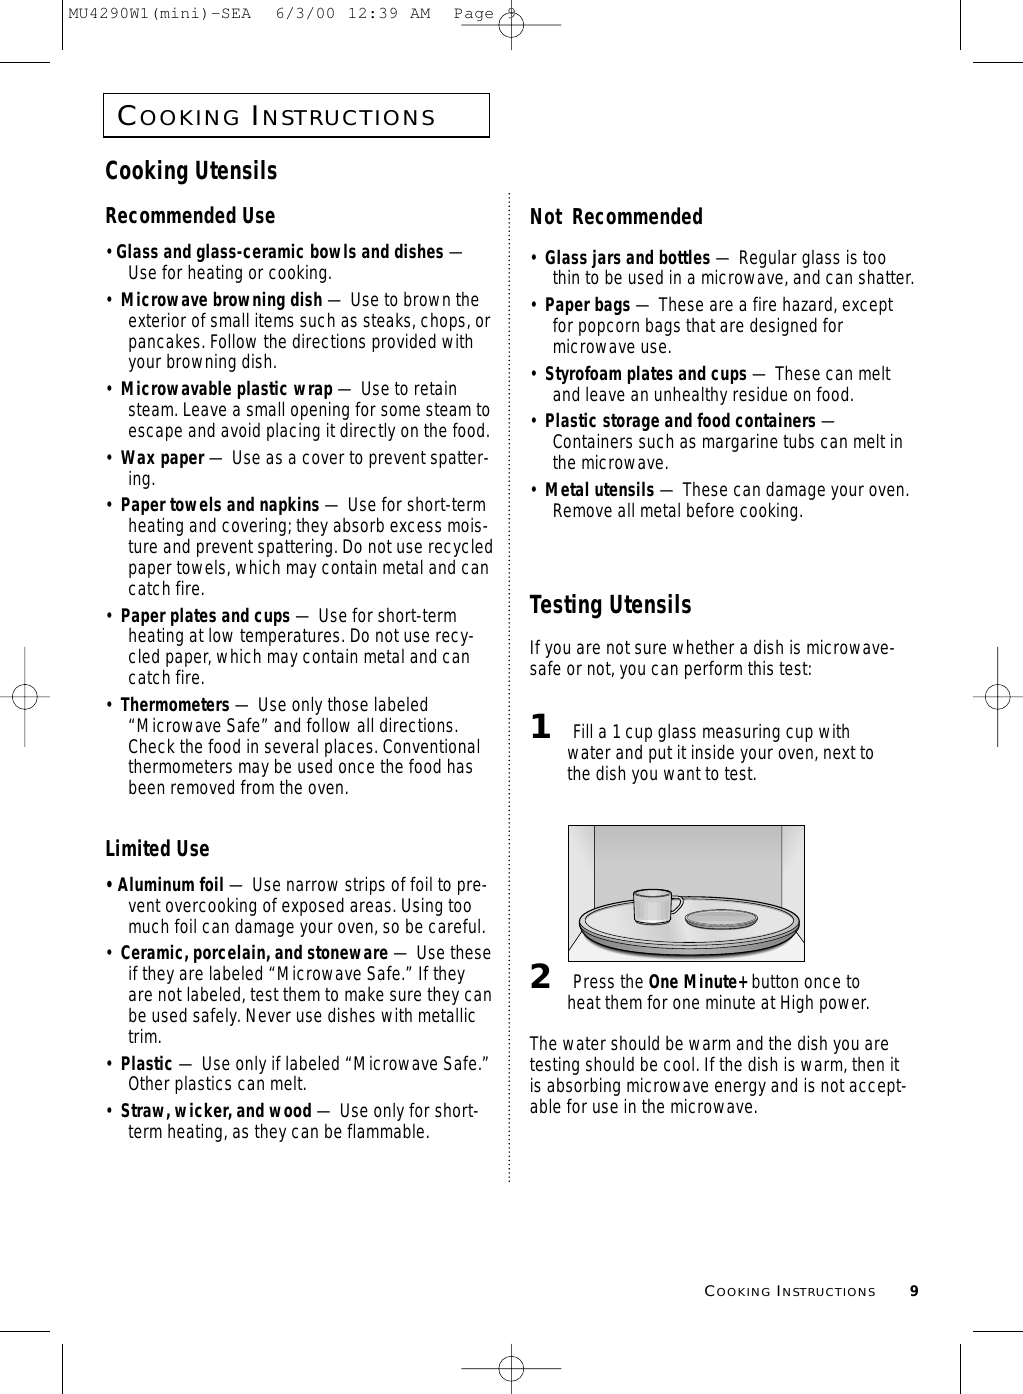 COOKINGINSTRUCTIONS9COOKINGINSTRUCTIONSCooking UtensilsRecommended Use• Glass and glass-ceramic bowls and dishes —Use for heating or cooking.•  Microwave browning dish — Use to brown theexterior of small items such as steaks, chops, orpancakes. Follow the directions provided withyour browning dish.•  Microwavable plastic wrap — Use to retainsteam. Leave a small opening for some steam toescape and avoid placing it directly on the food.•  Wax paper — Use as a cover to prevent spatter-ing.•  Paper towels and napkins — Use for short-termheating and covering; they absorb excess mois-ture and prevent spattering. Do not use recycledpaper towels, which may contain metal and cancatch fire.•  Paper plates and cups — Use for short-termheating at low temperatures. Do not use recy-cled paper, which may contain metal and cancatch fire.•  Thermometers — Use only those labeled“Microwave Safe” and follow all directions.Check the food in several places. Conventionalthermometers may be used once the food hasbeen removed from the oven.Limited Use• Aluminum foil — Use narrow strips of foil to pre-vent overcooking of exposed areas. Using toomuch foil can damage your oven, so be careful.•  Ceramic, porcelain, and stoneware — Use theseif they are labeled “Microwave Safe.” If theyare not labeled, test them to make sure they canbe used safely. Never use dishes with metallictrim.•  Plastic — Use only if labeled “Microwave Safe.”Other plastics can melt.•  Straw, wicker, and wood — Use only for short-term heating, as they can be flammable.Not  Recommended•  Glass jars and bottles — Regular glass is toothin to be used in a microwave, and can shatter.•  Paper bags — These are a fire hazard, exceptfor popcorn bags that are designed formicrowave use.•  Styrofoam plates and cups — These can meltand leave an unhealthy residue on food.•  Plastic storage and food containers —Containers such as margarine tubs can melt inthe microwave.•  Metal utensils — These can damage your oven.Remove all metal before cooking. Testing UtensilsIf you are not sure whether a dish is microwave-safe or not, you can perform this test:1Fill a 1 cup glass measuring cup withwater and put it inside your oven, next tothe dish you want to test.2Press the One Minute+ button once toheat them for one minute at High power.The water should be warm and the dish you aretesting should be cool. If the dish is warm, then itis absorbing microwave energy and is not accept-able for use in the microwave.MU4290W1(mini)-SEA  6/3/00 12:39 AM  Page 9